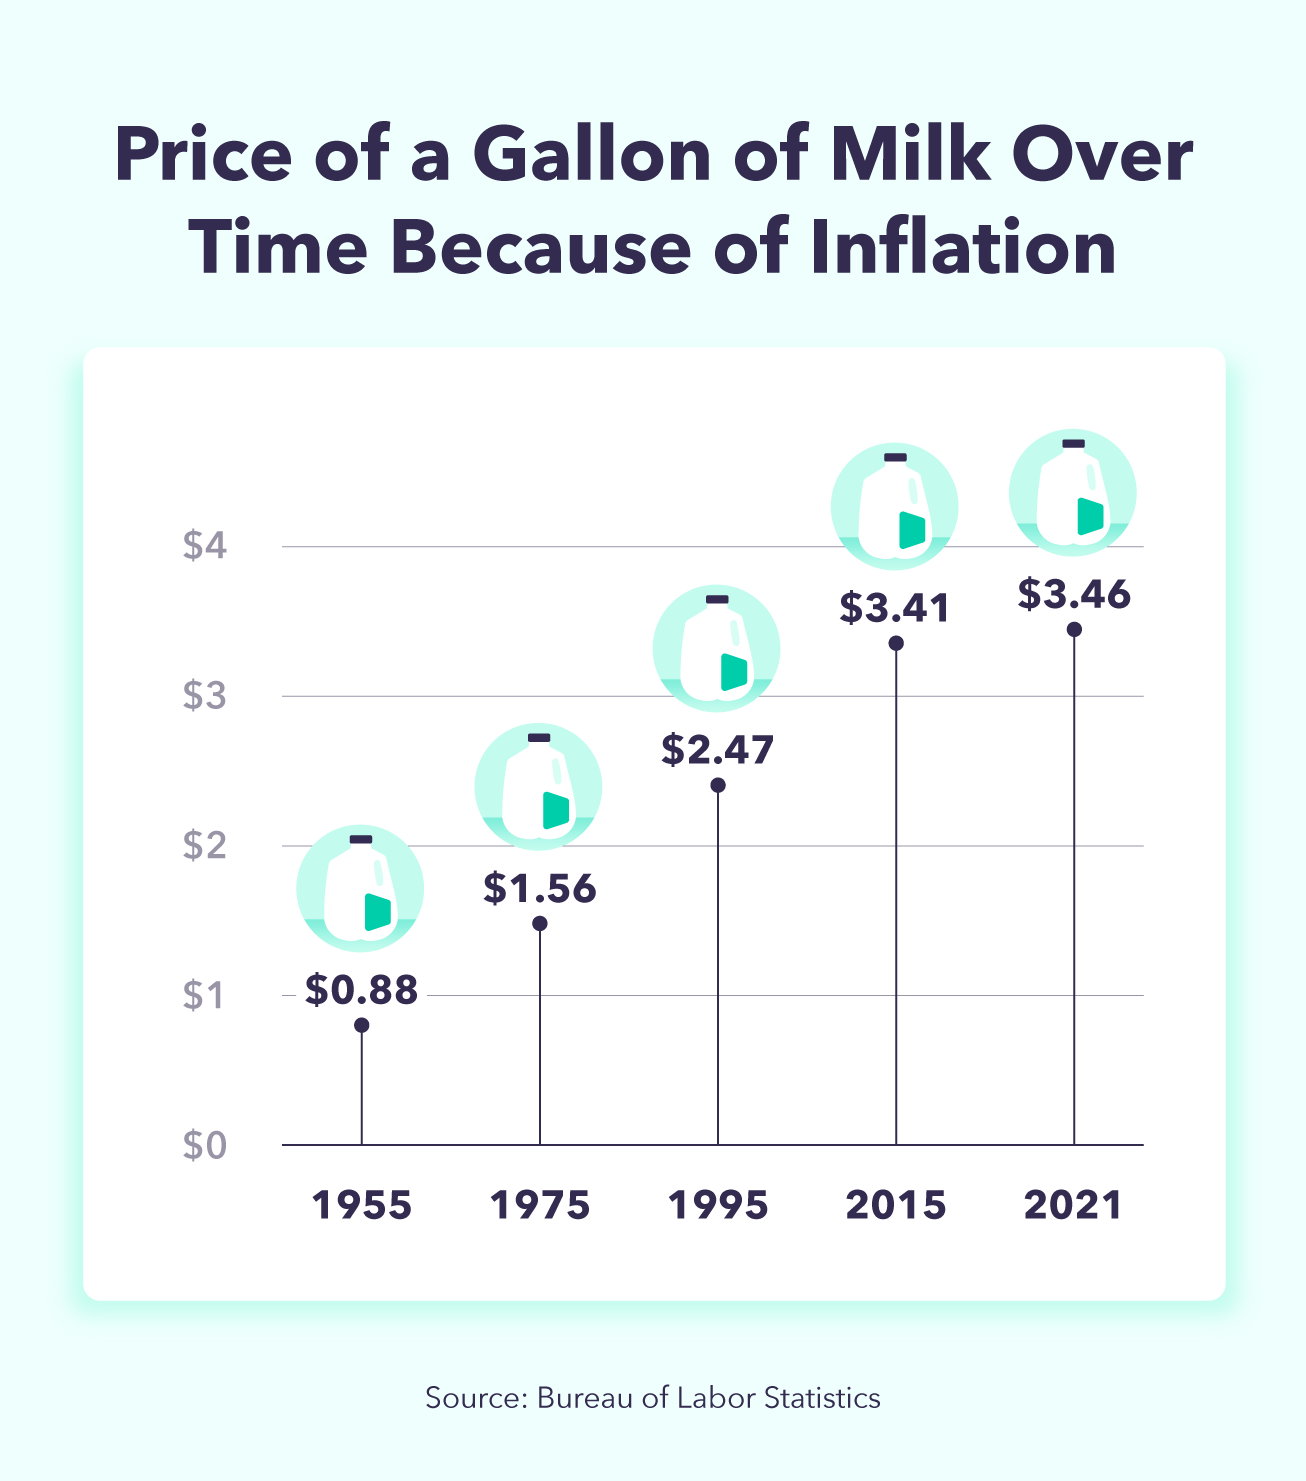 price-of-a-gallon-of-milk-over-time-because-of-inflation